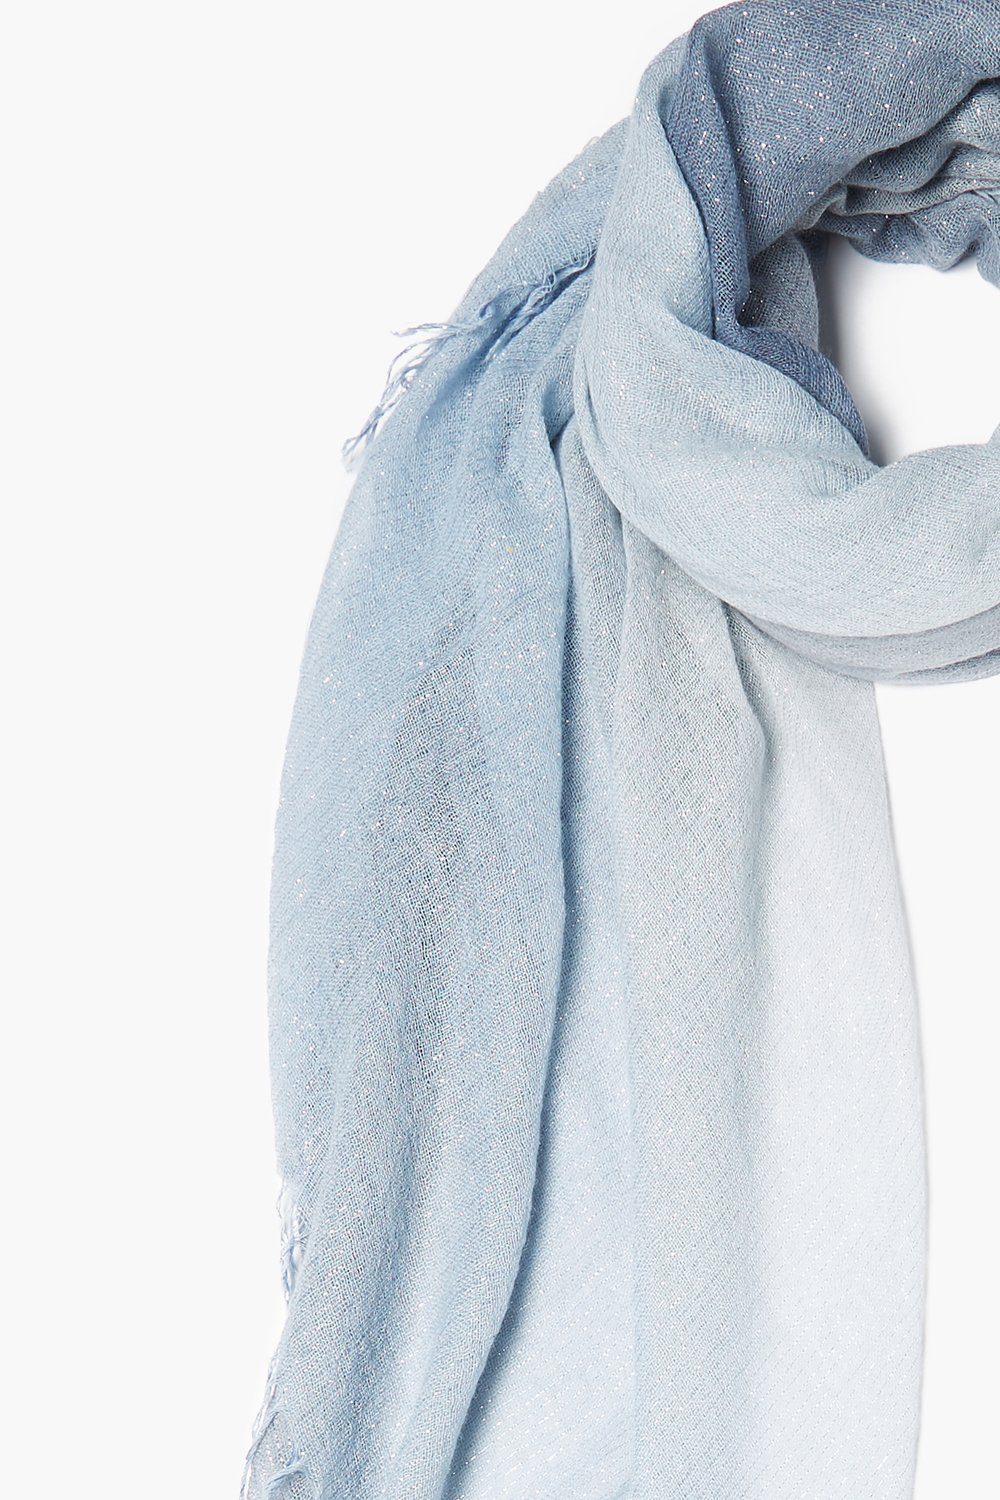 Dusty Blue / Bering Sea Dip-Dyed Metallic Cashmere and Silk Scarf